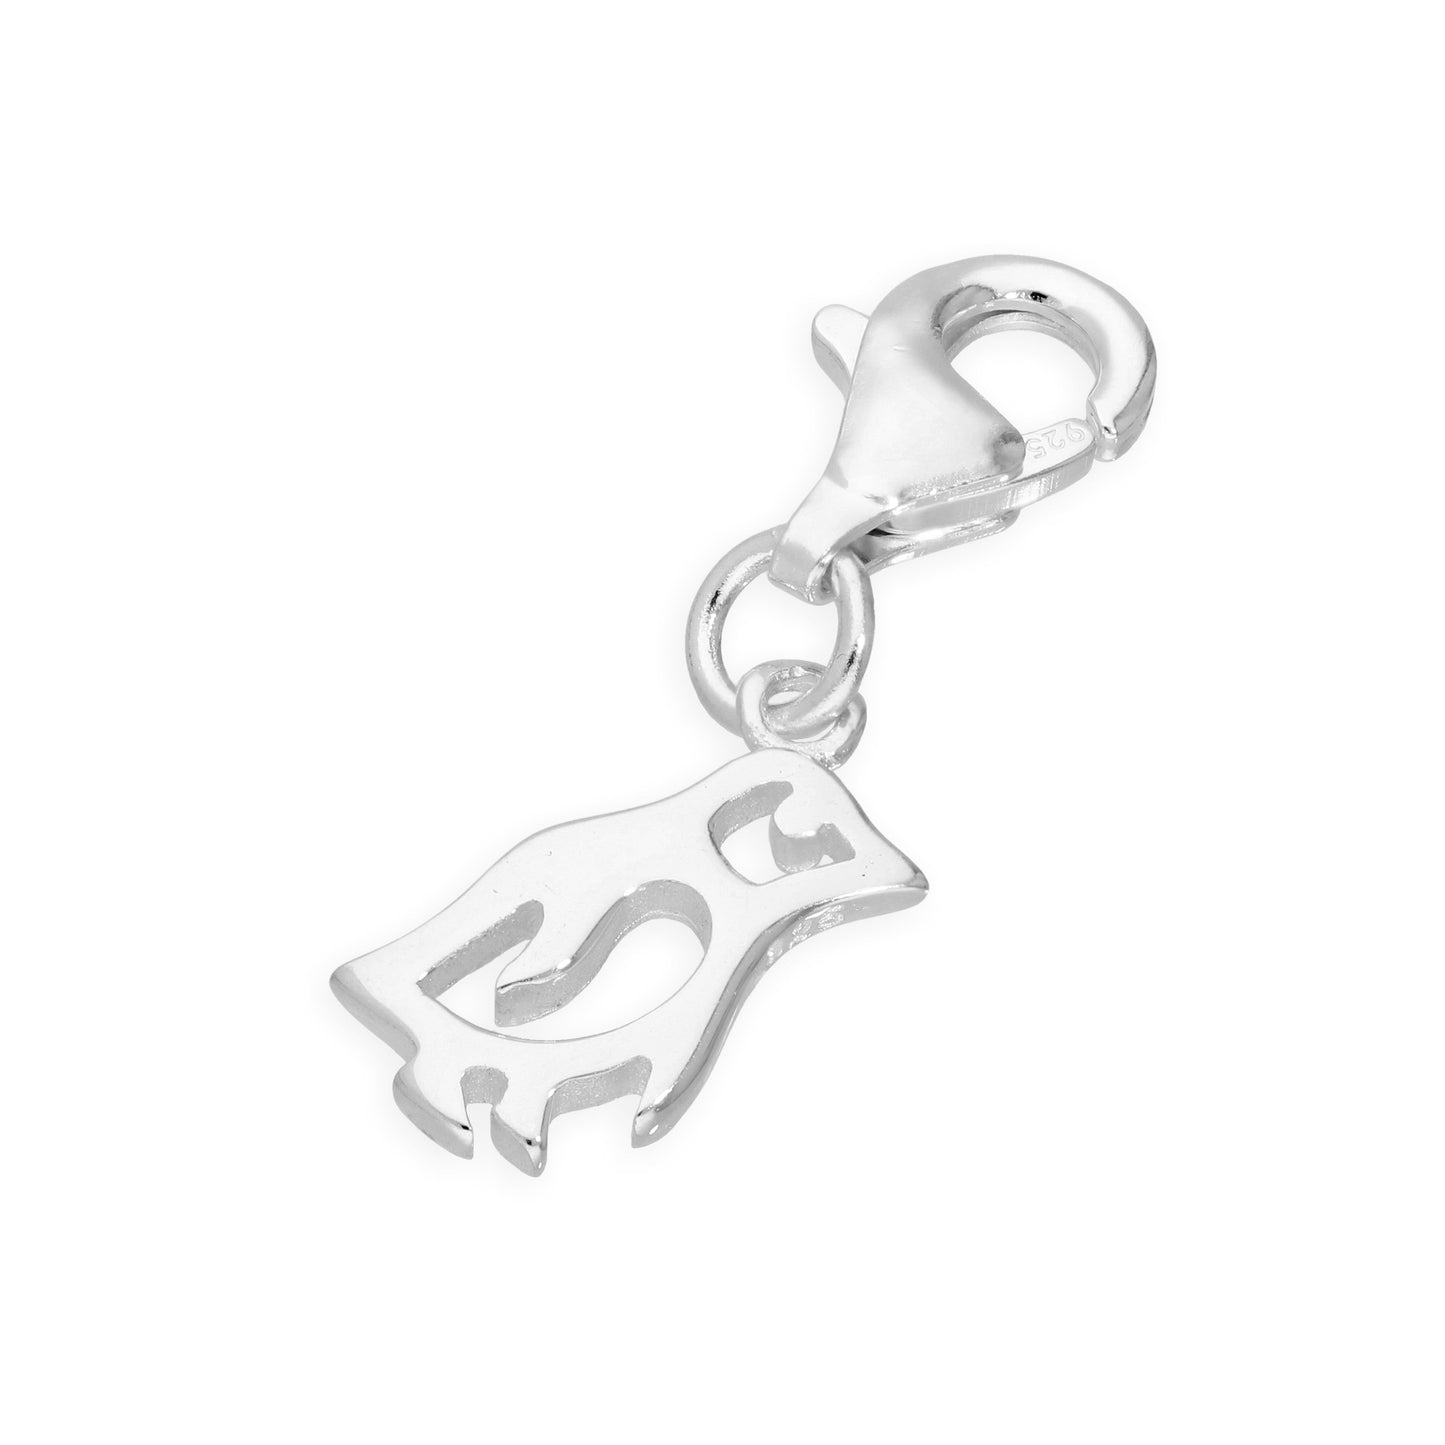 Sterling Silver Penguin Clip on Charm w Cut Out Details